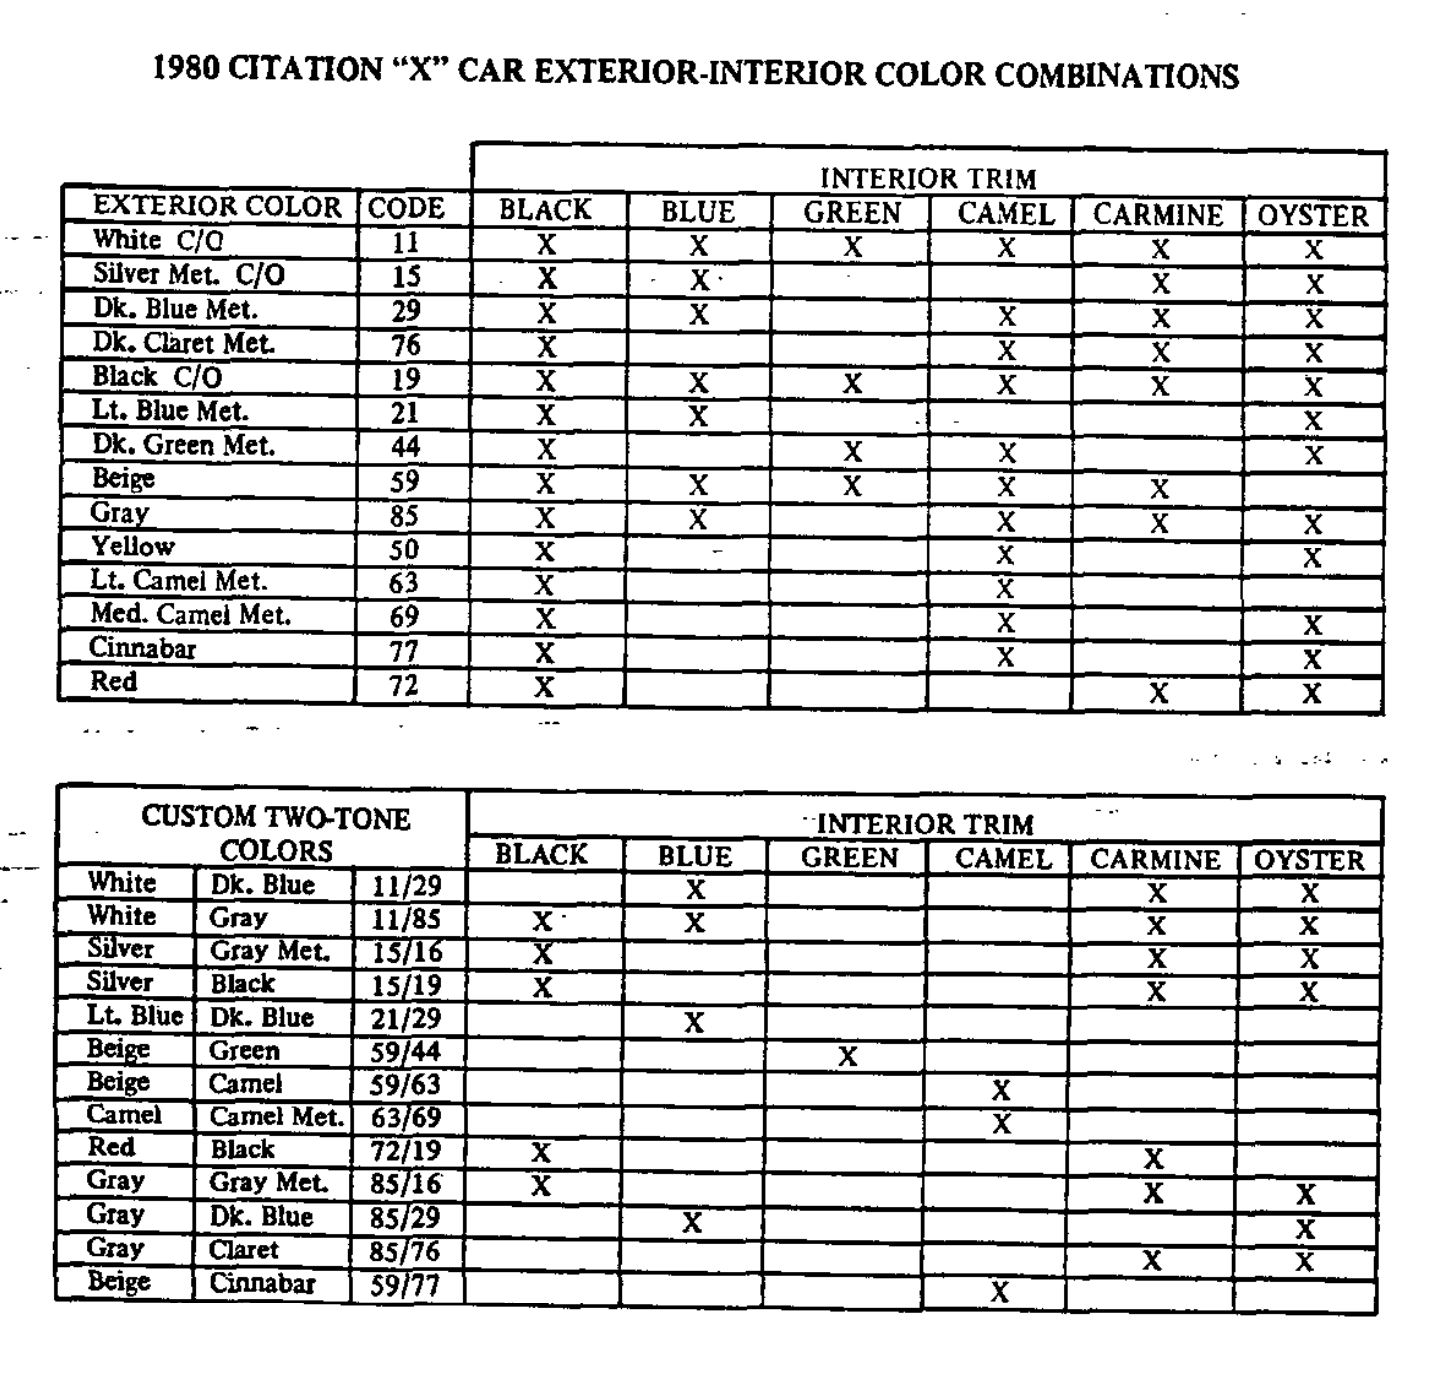 Color Code Chart that shows the colors used on a 1980 Chevrolet Citation 